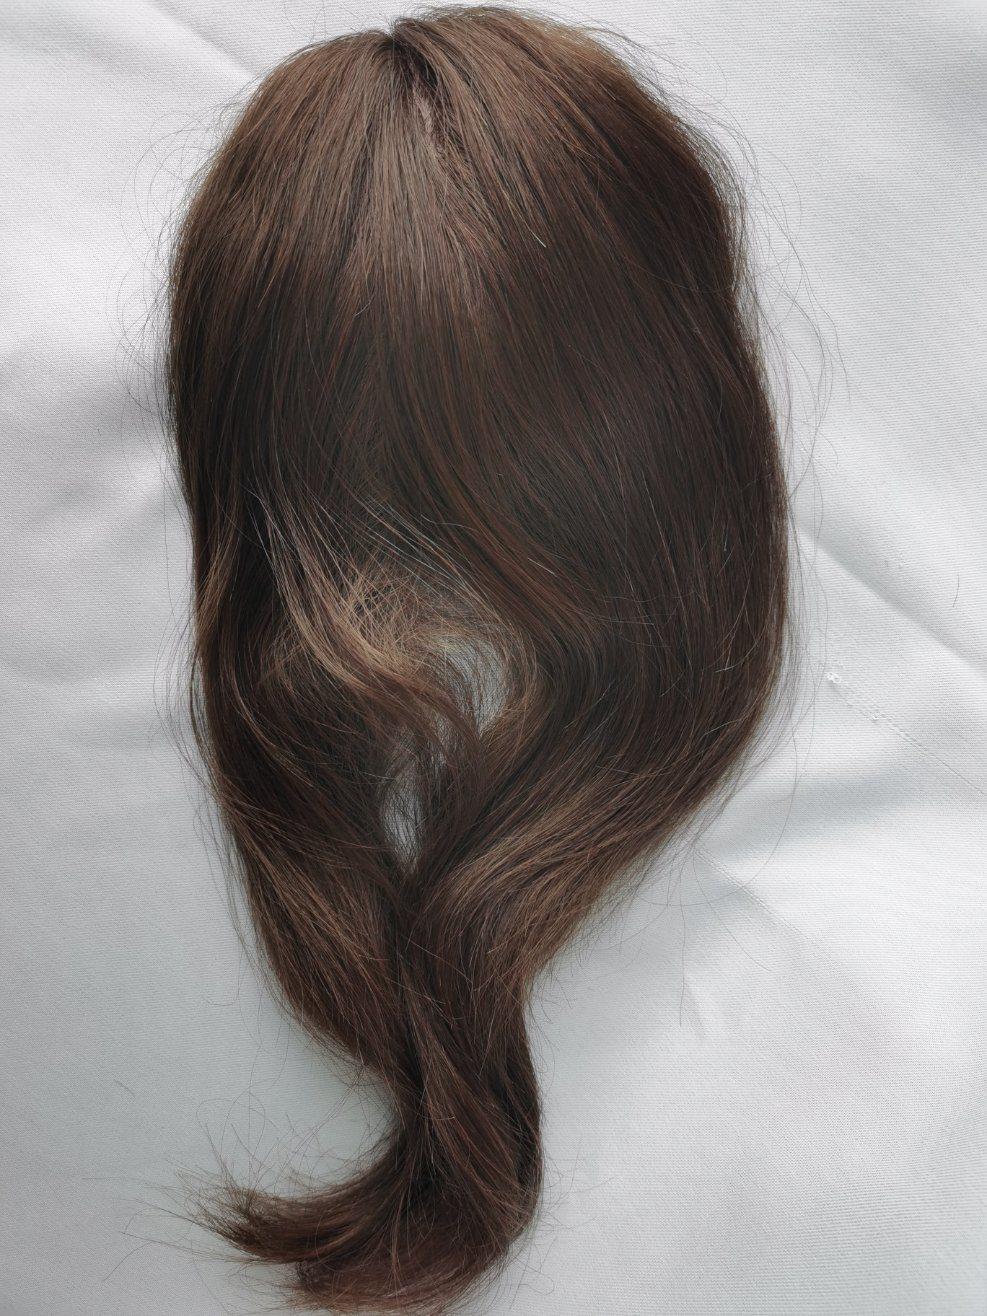 2022 Most Durable Hand Knoted Silk Top Injected Lace Human Hair Wigs Made of Remy Human Hair